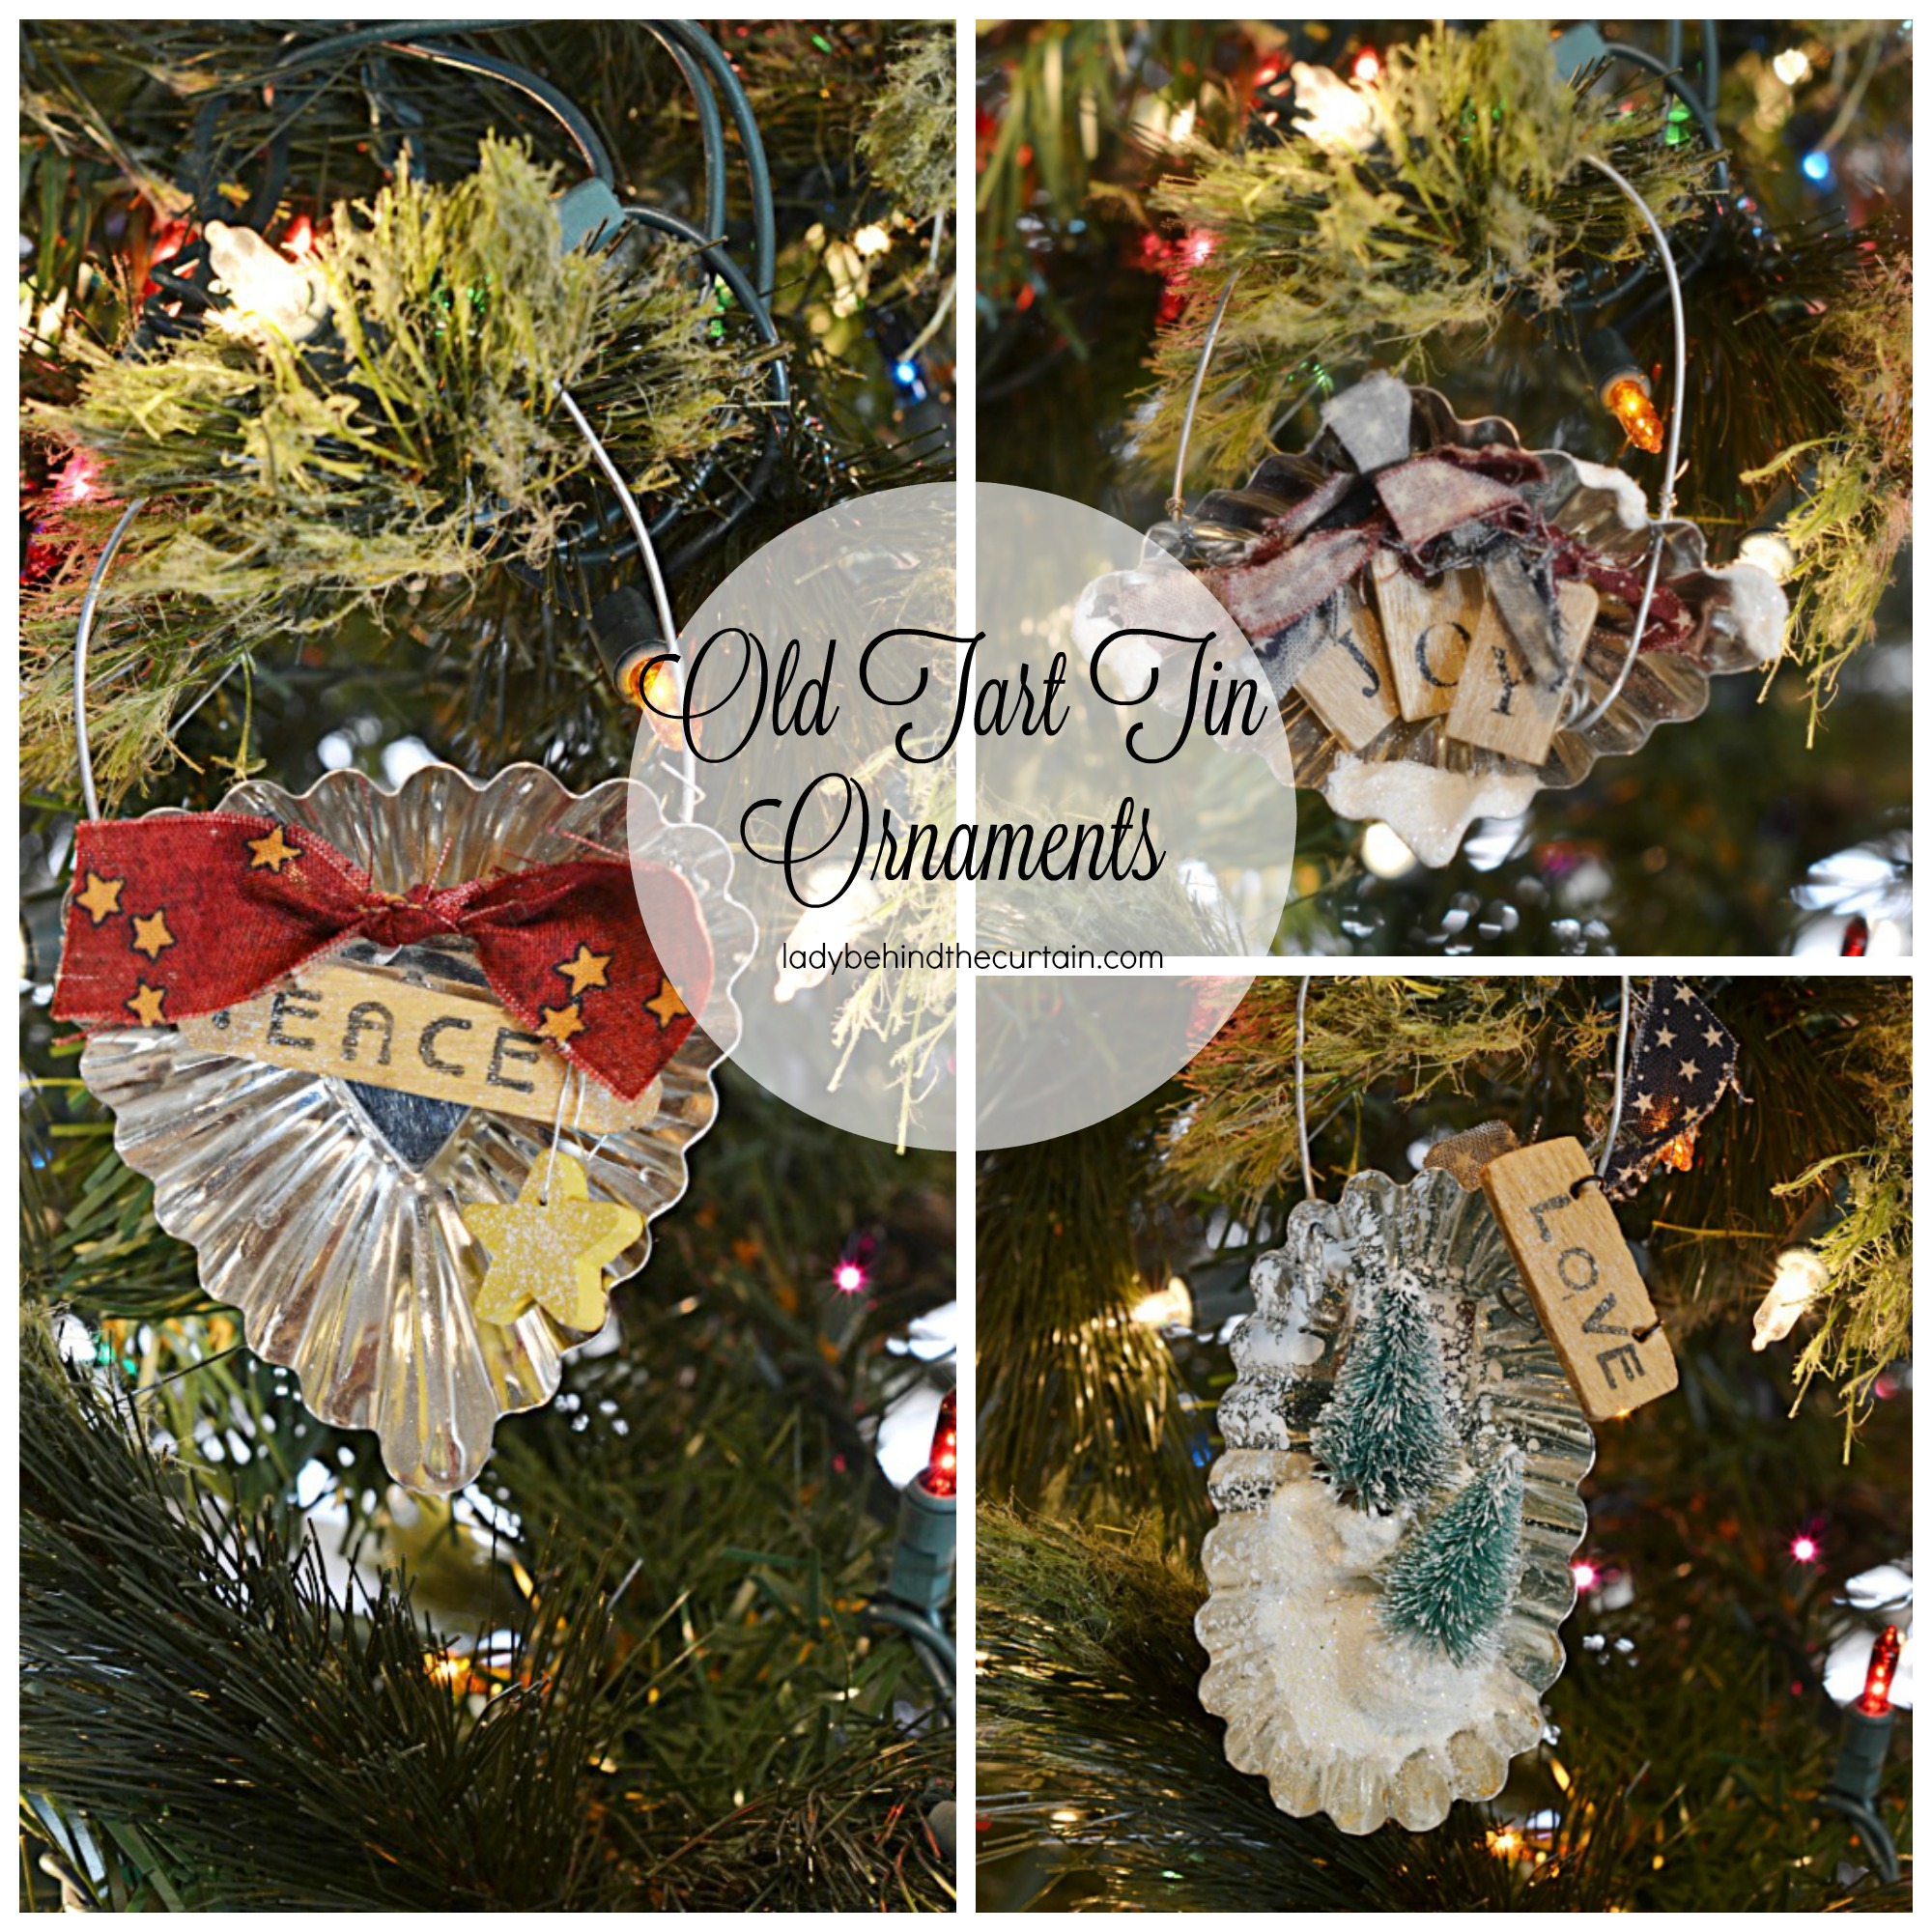 Old Tart Tin Ornaments | Add a touch that cozy Country Christmas feel and make ornaments out of old tart tins.